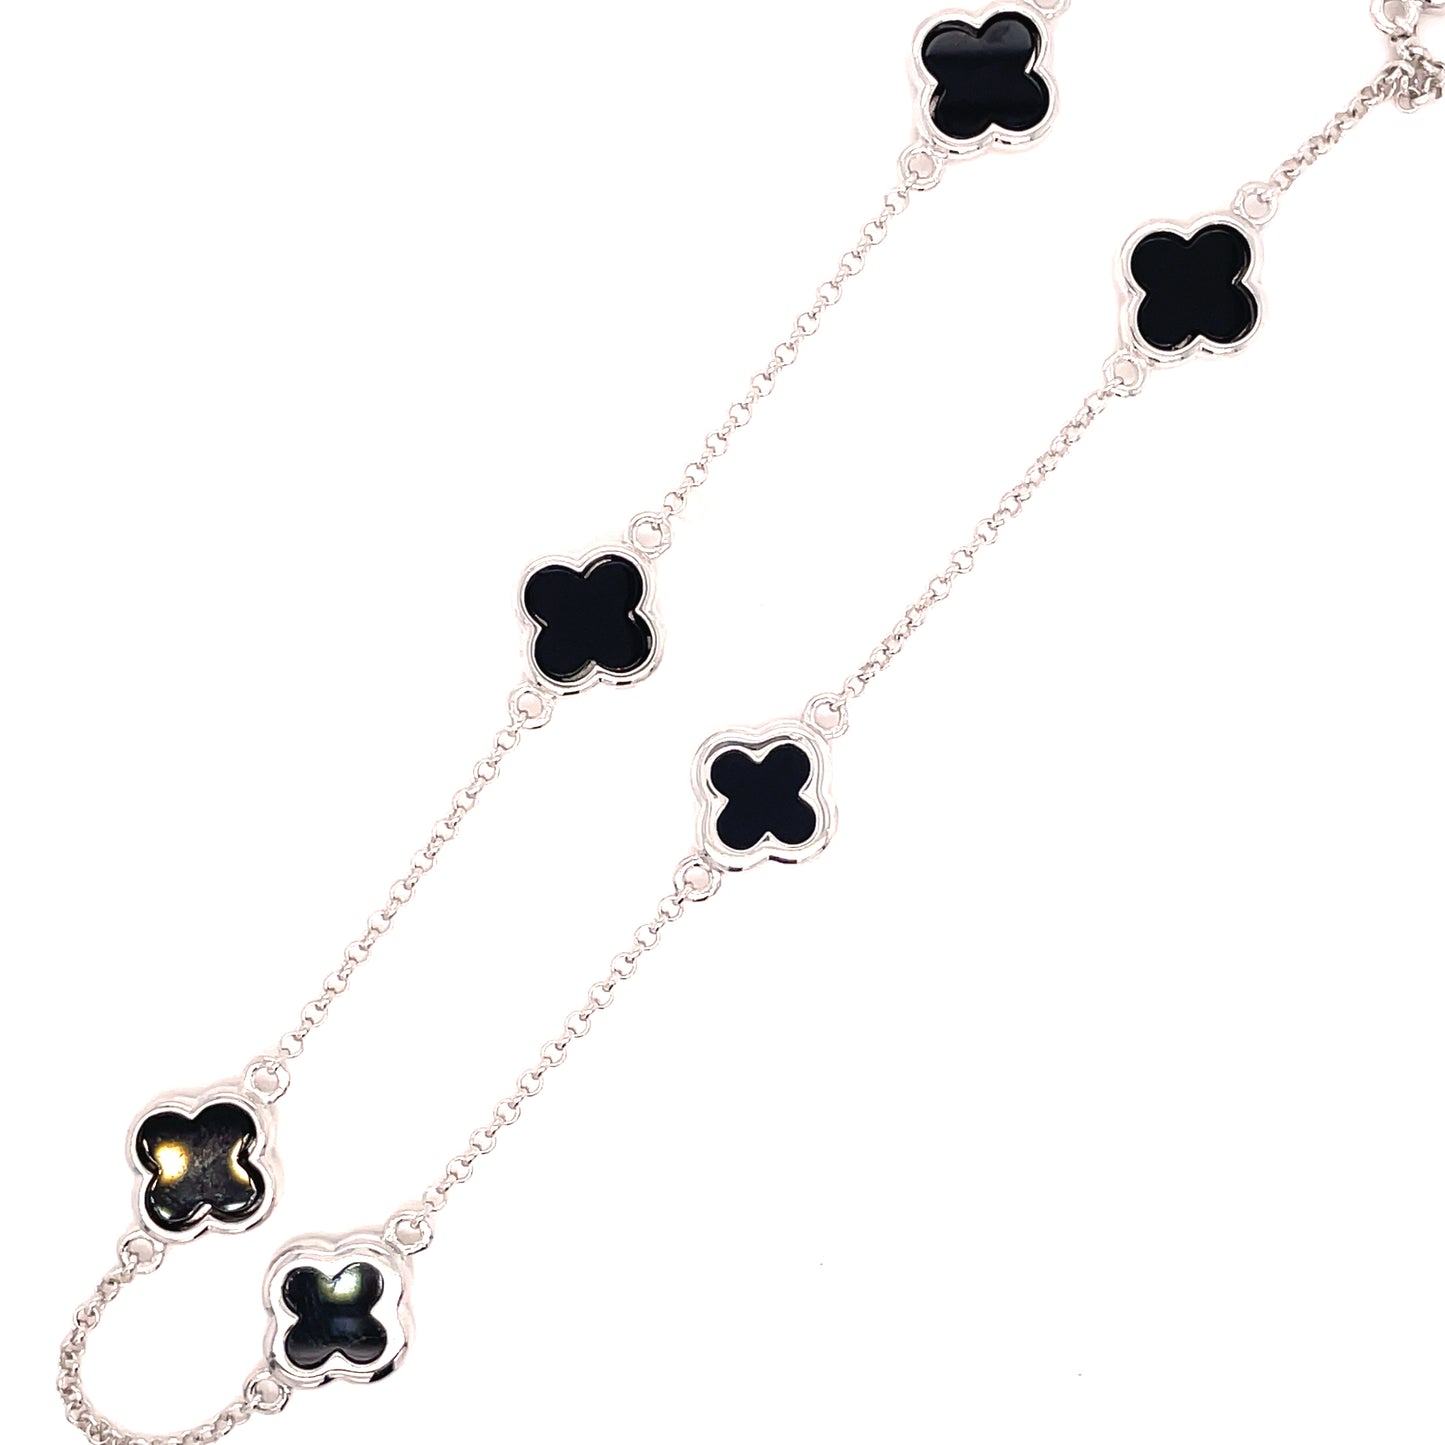 STERLING SILVER SMALL CLOVER SCATTER NECKLET WITH BLACK CENTRE